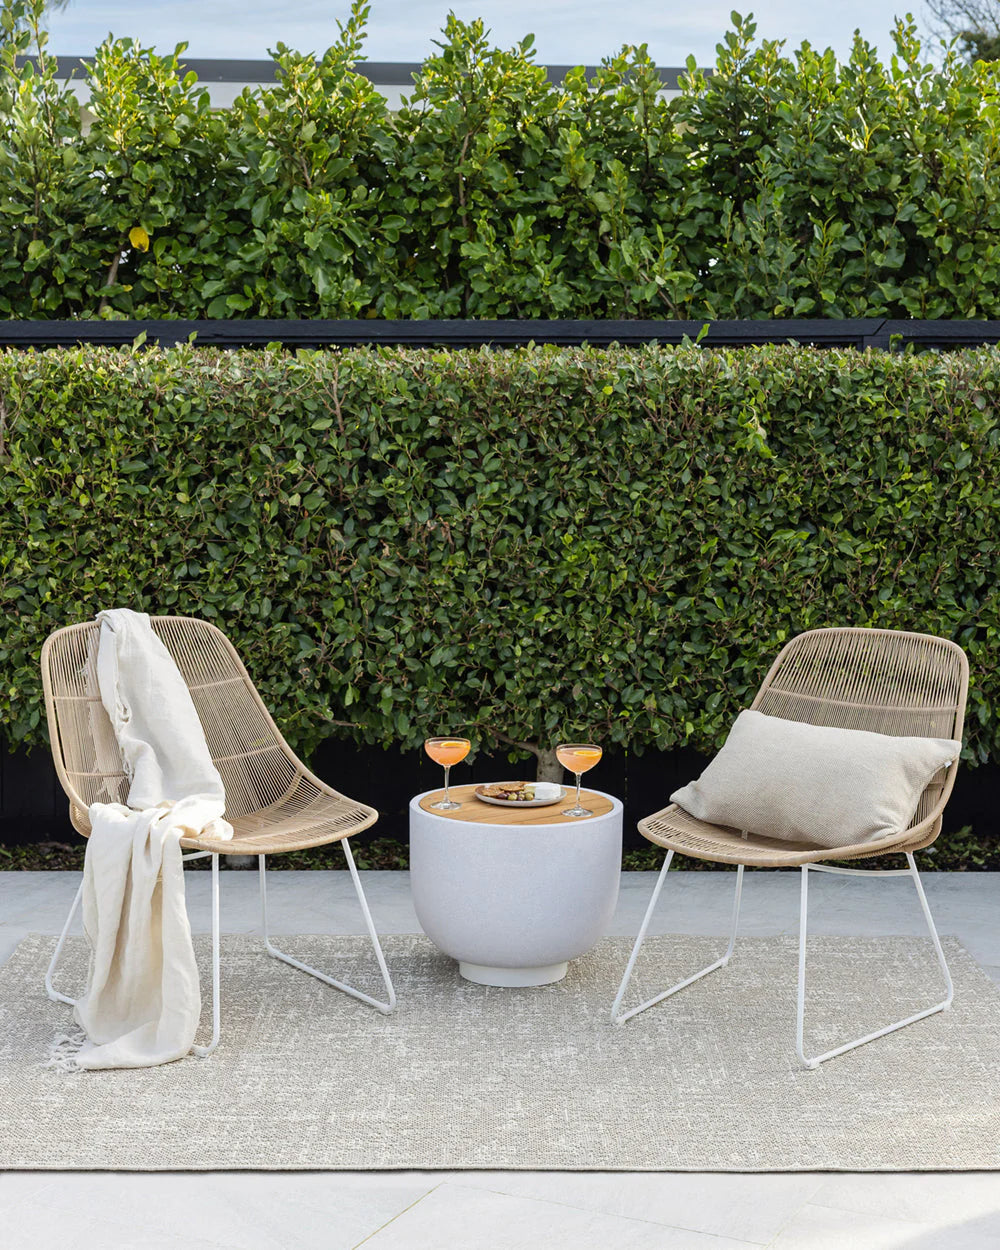 Rattan Outdoor Rug from Baya Furtex Stockist Make Your House A Home, Furniture Store Bendigo. Free Australia Wide Delivery.